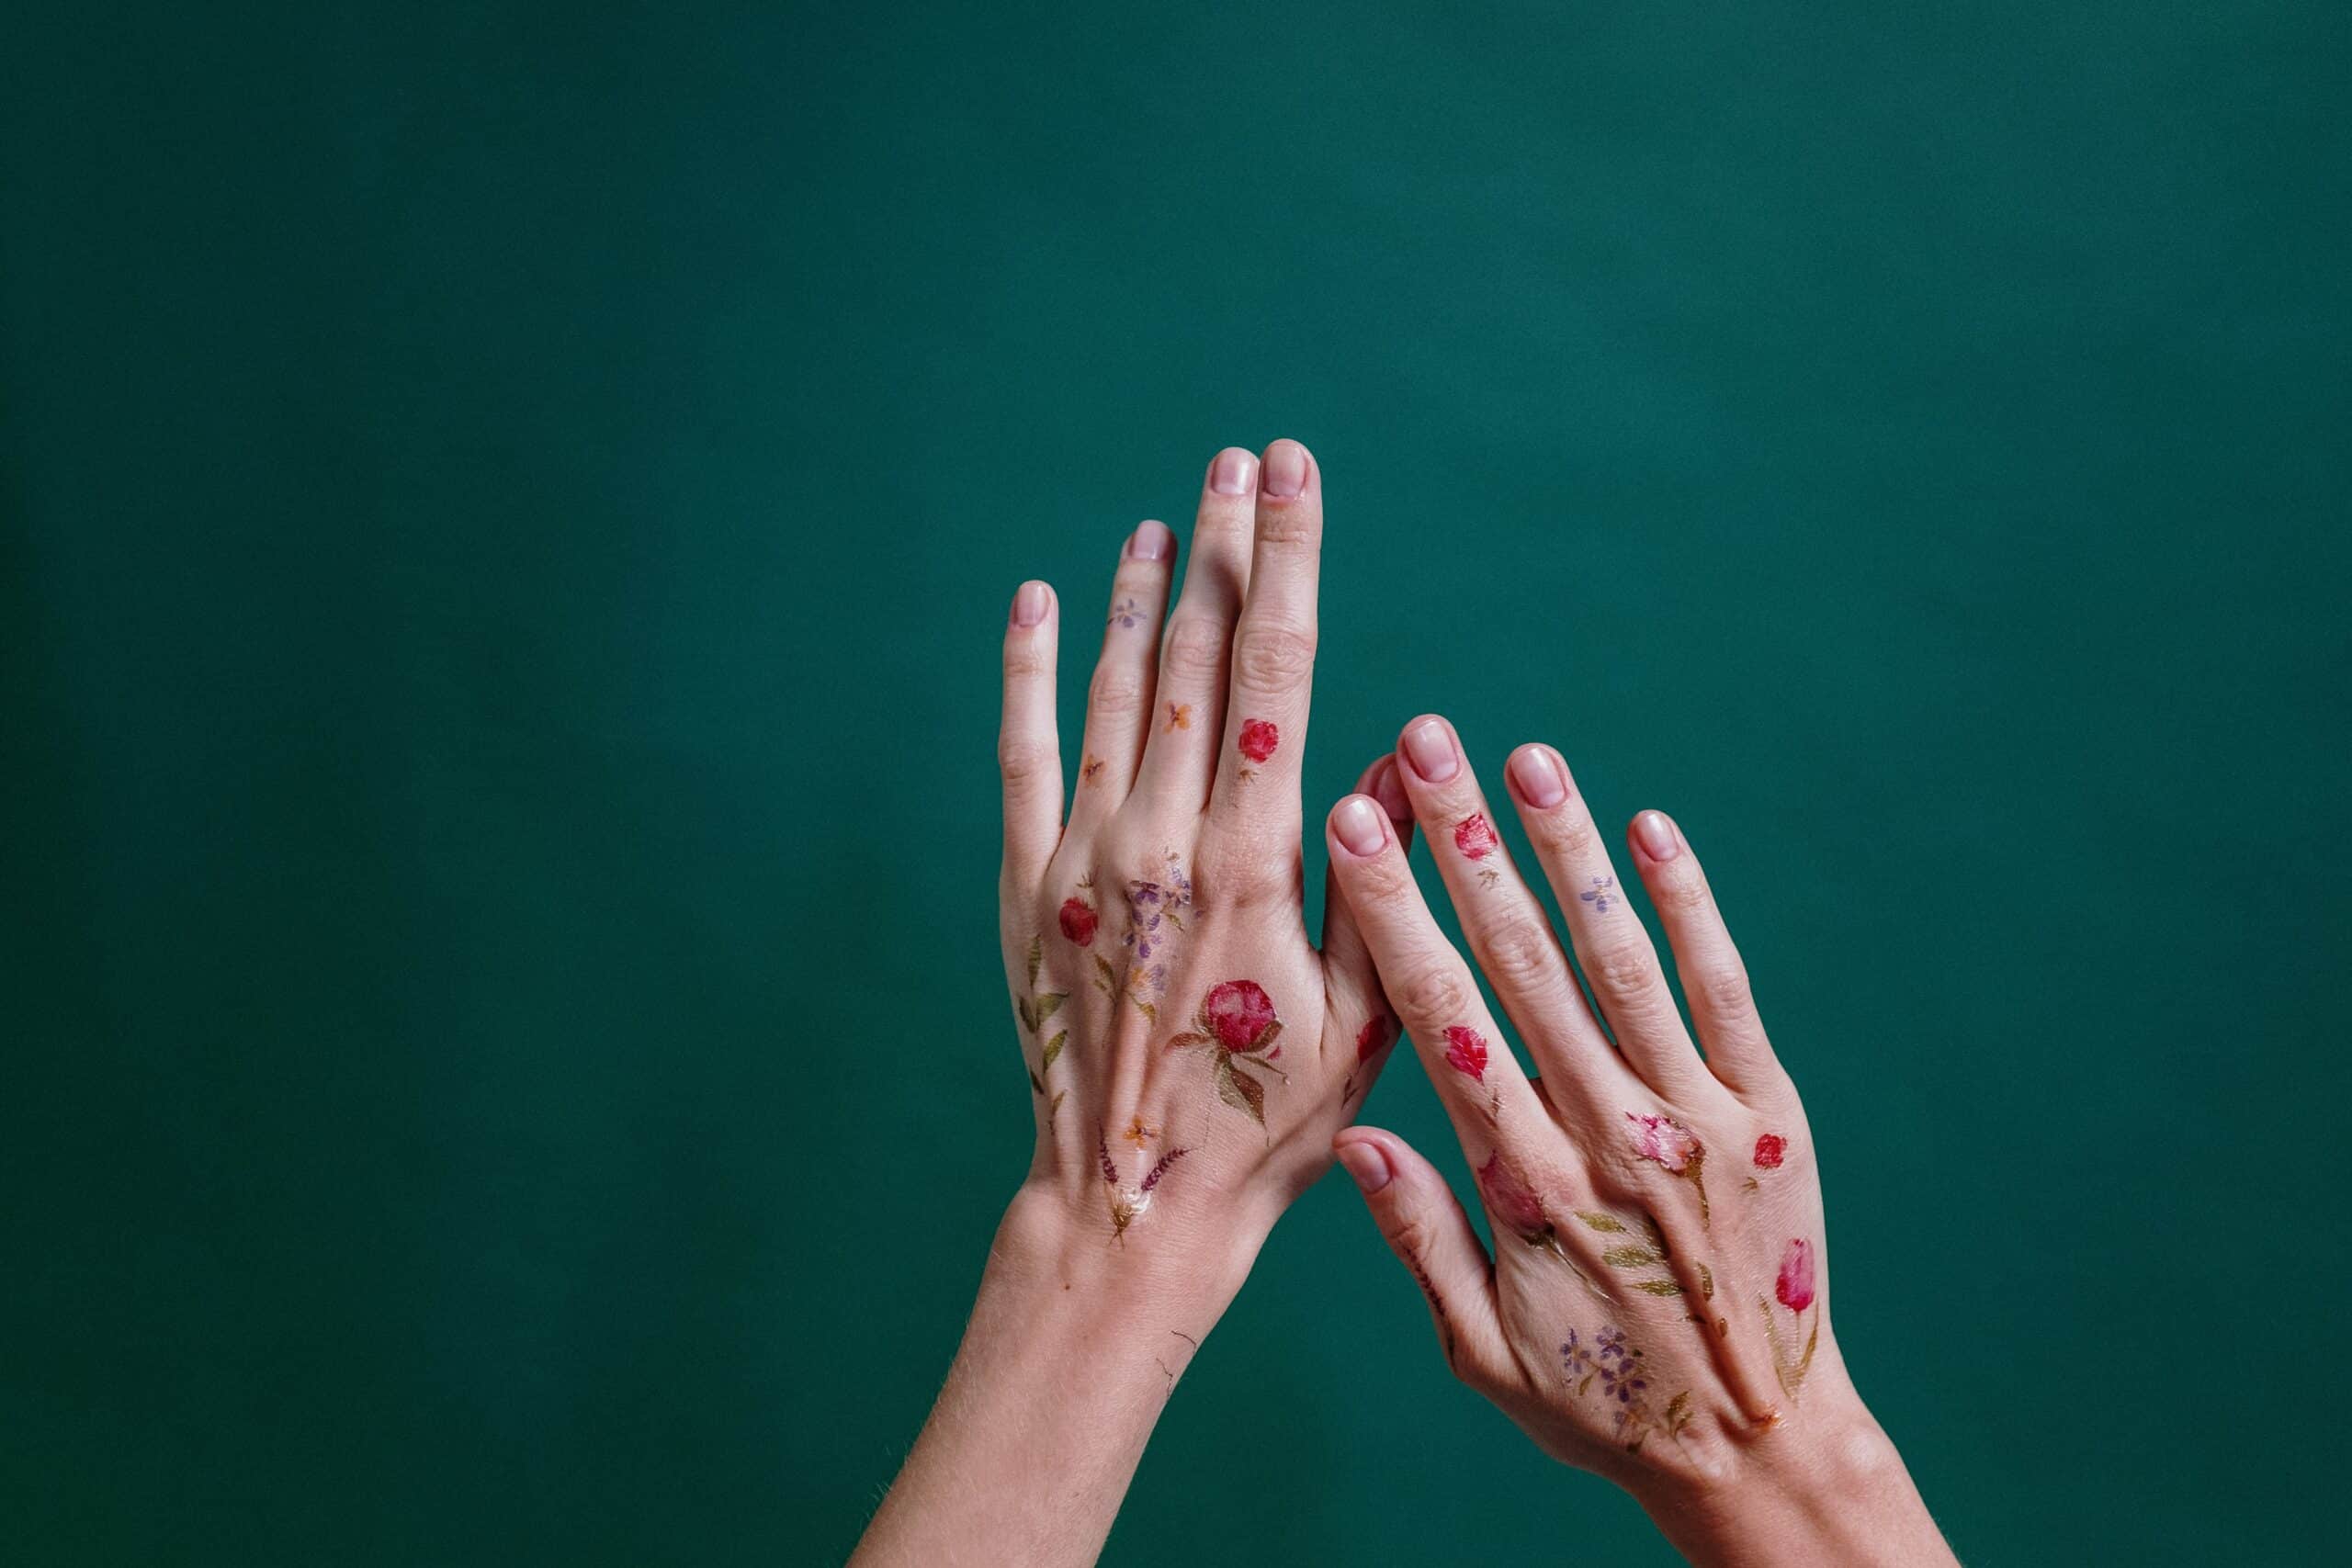 hands covered in colorful floral temporary tattoos